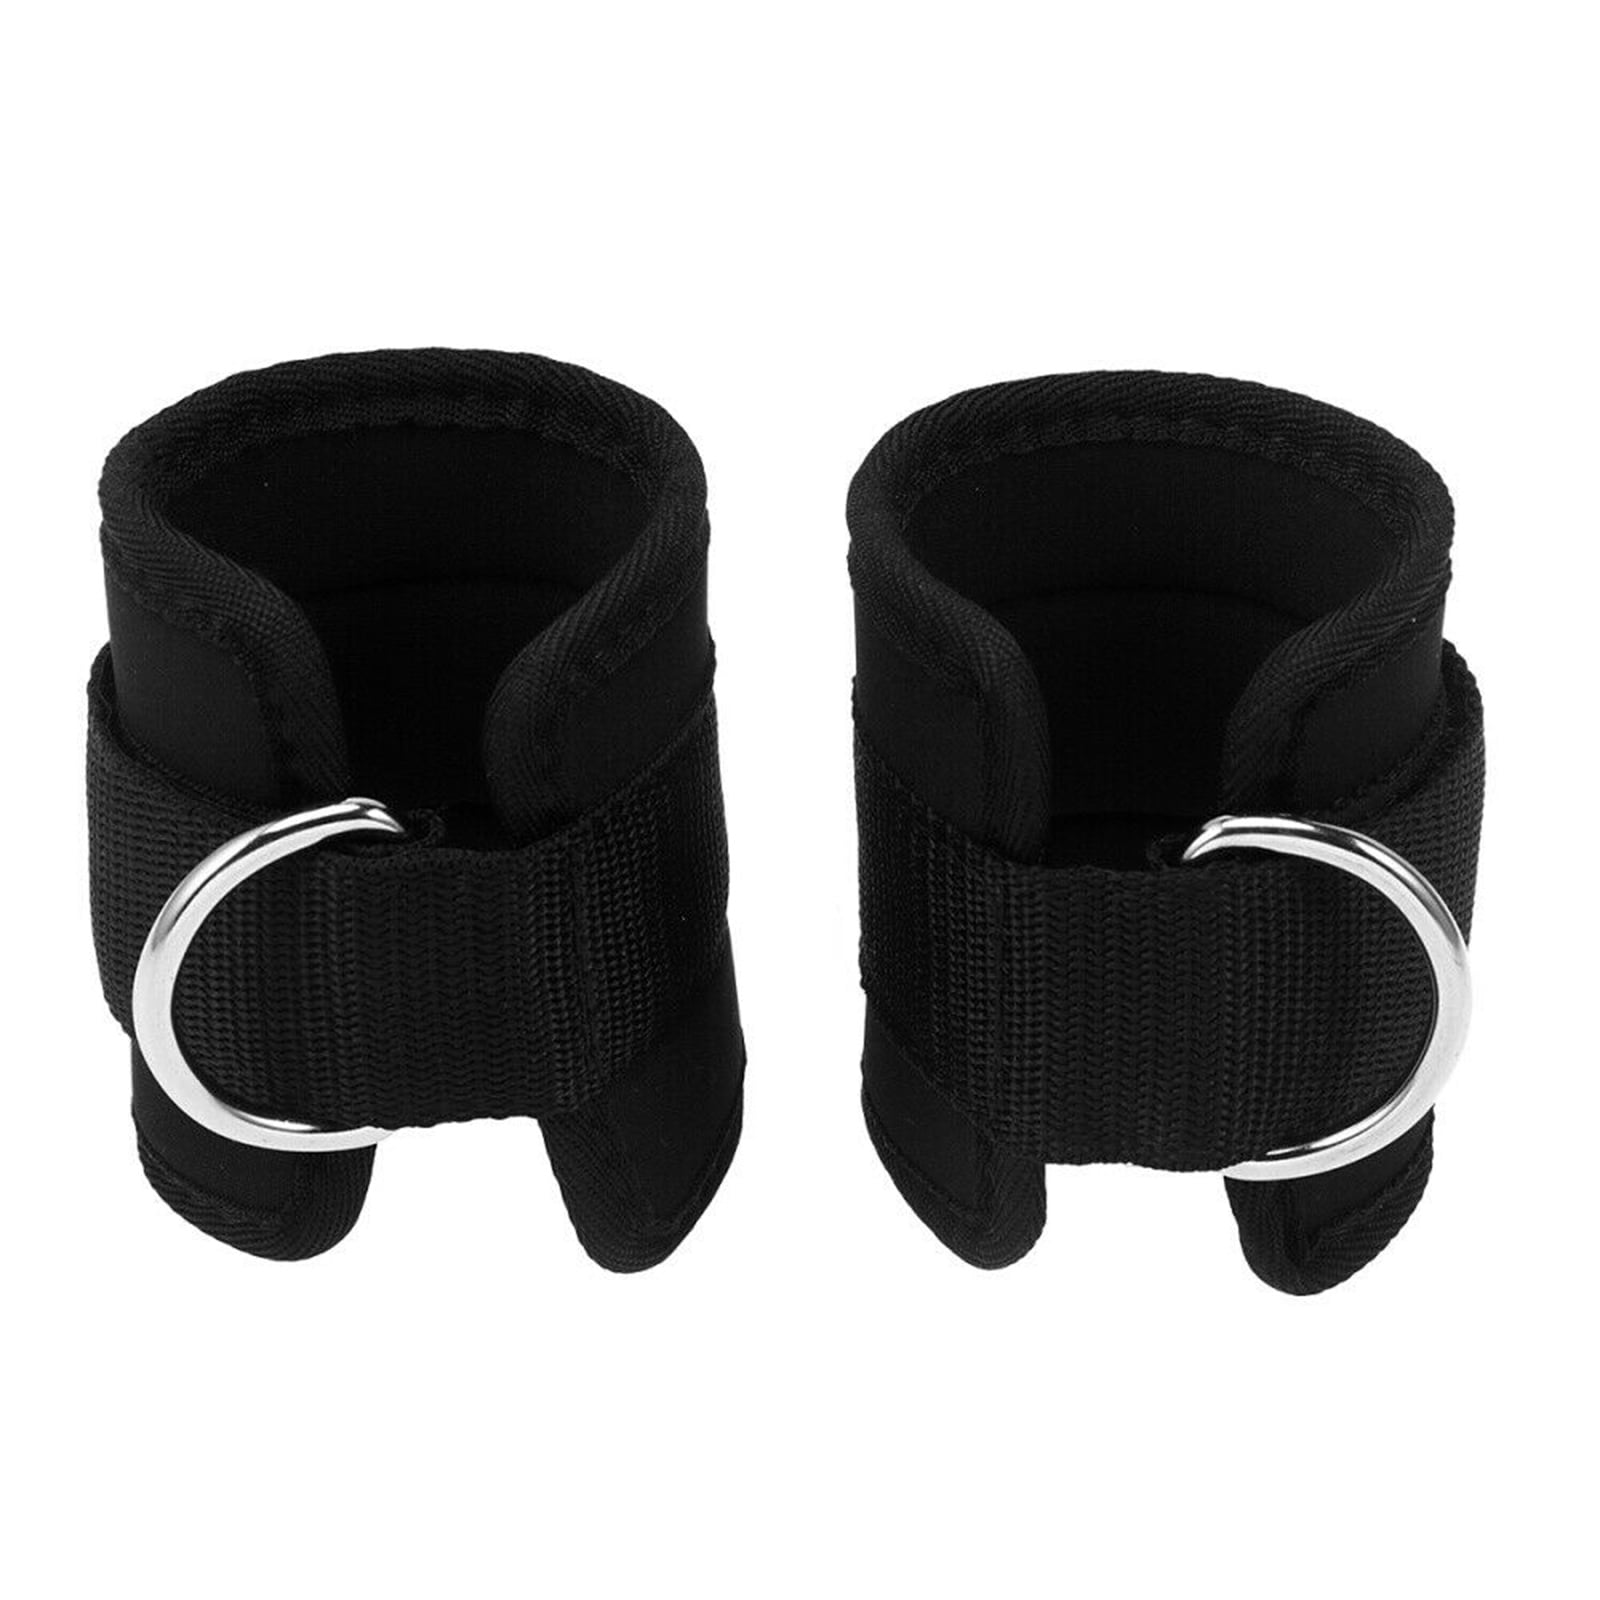 2pcs Ankle Weights Adjustable Leg Wrist Strap Running Boxing Braclets ...